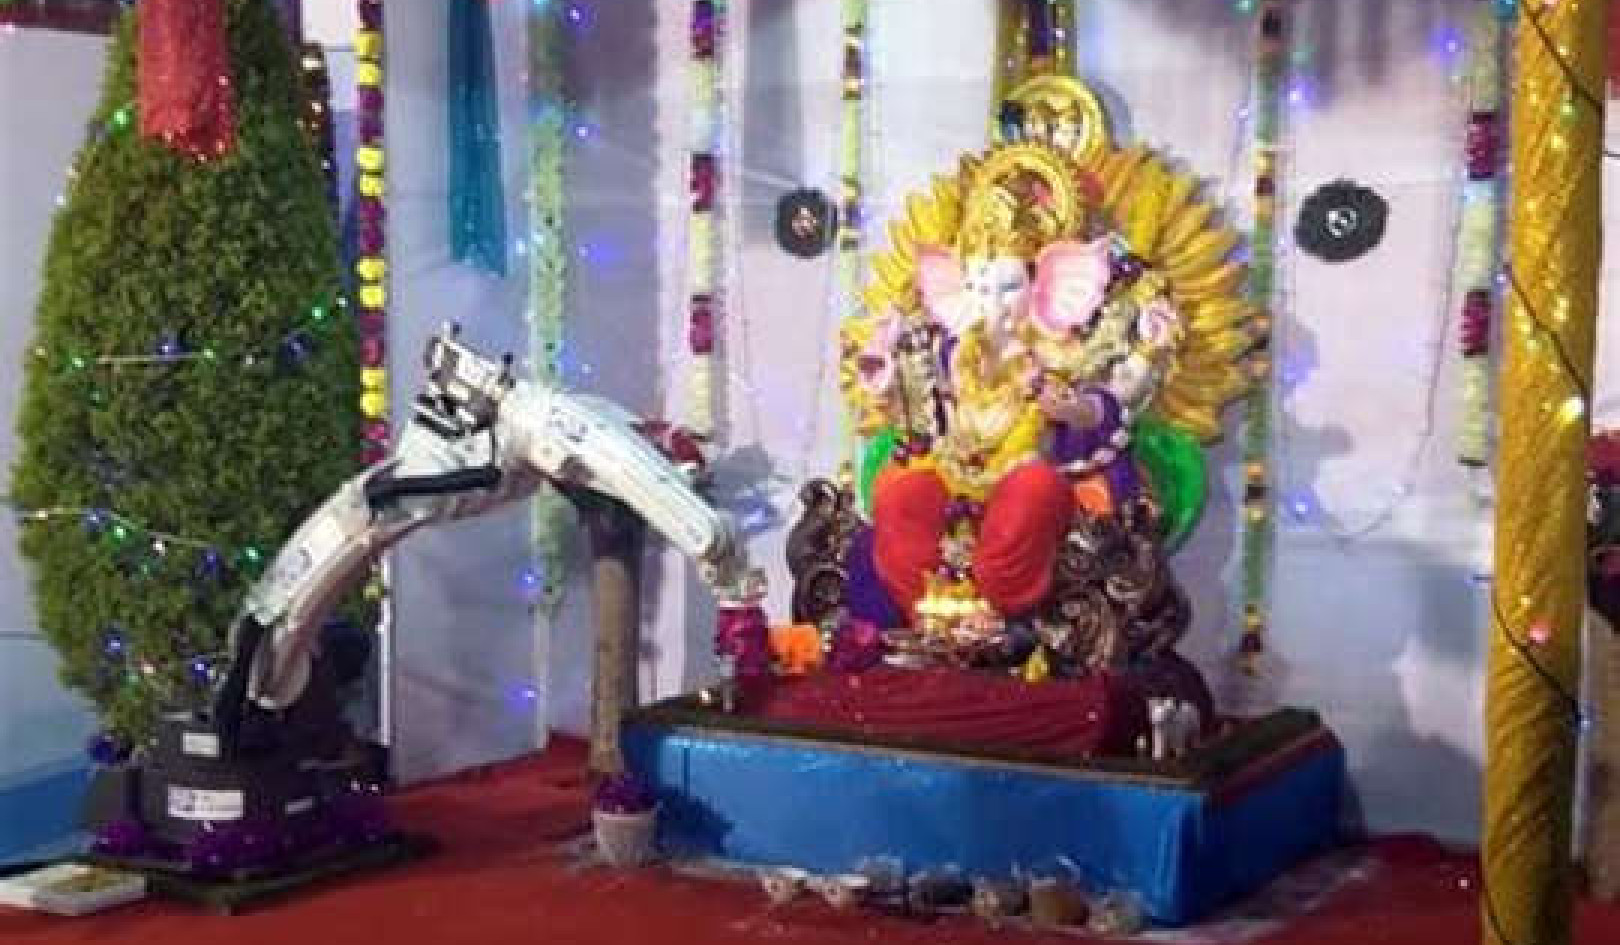 Are Robots Performing Hindu Rituals and Replacing Worhippers?